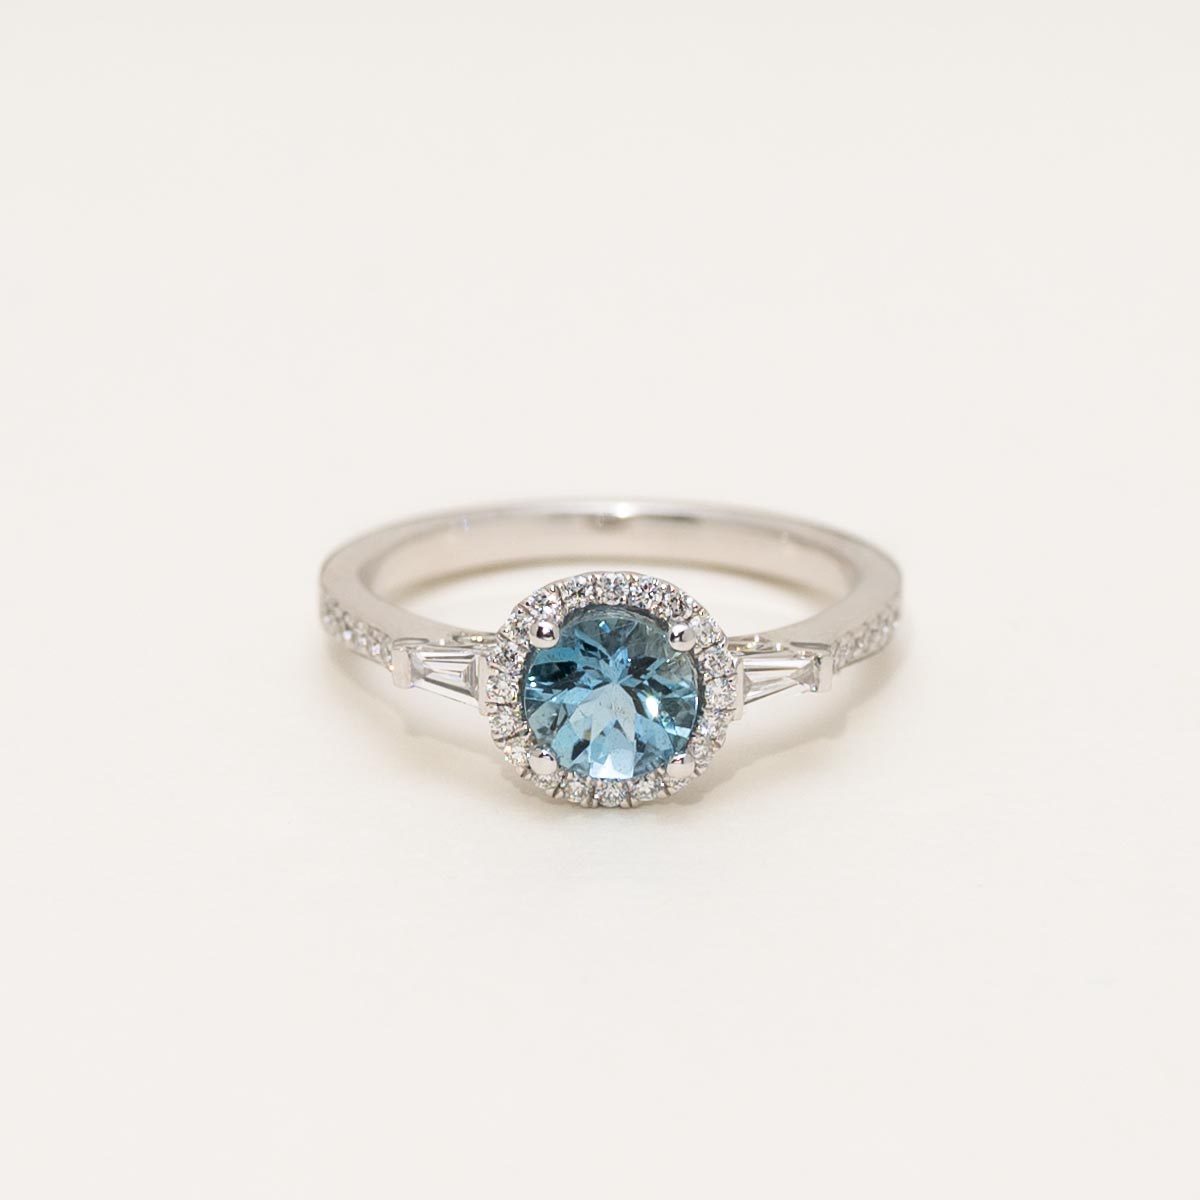 Aquamarine Halo Ring in 14kt White Gold with Diamonds (1/4ct tw)